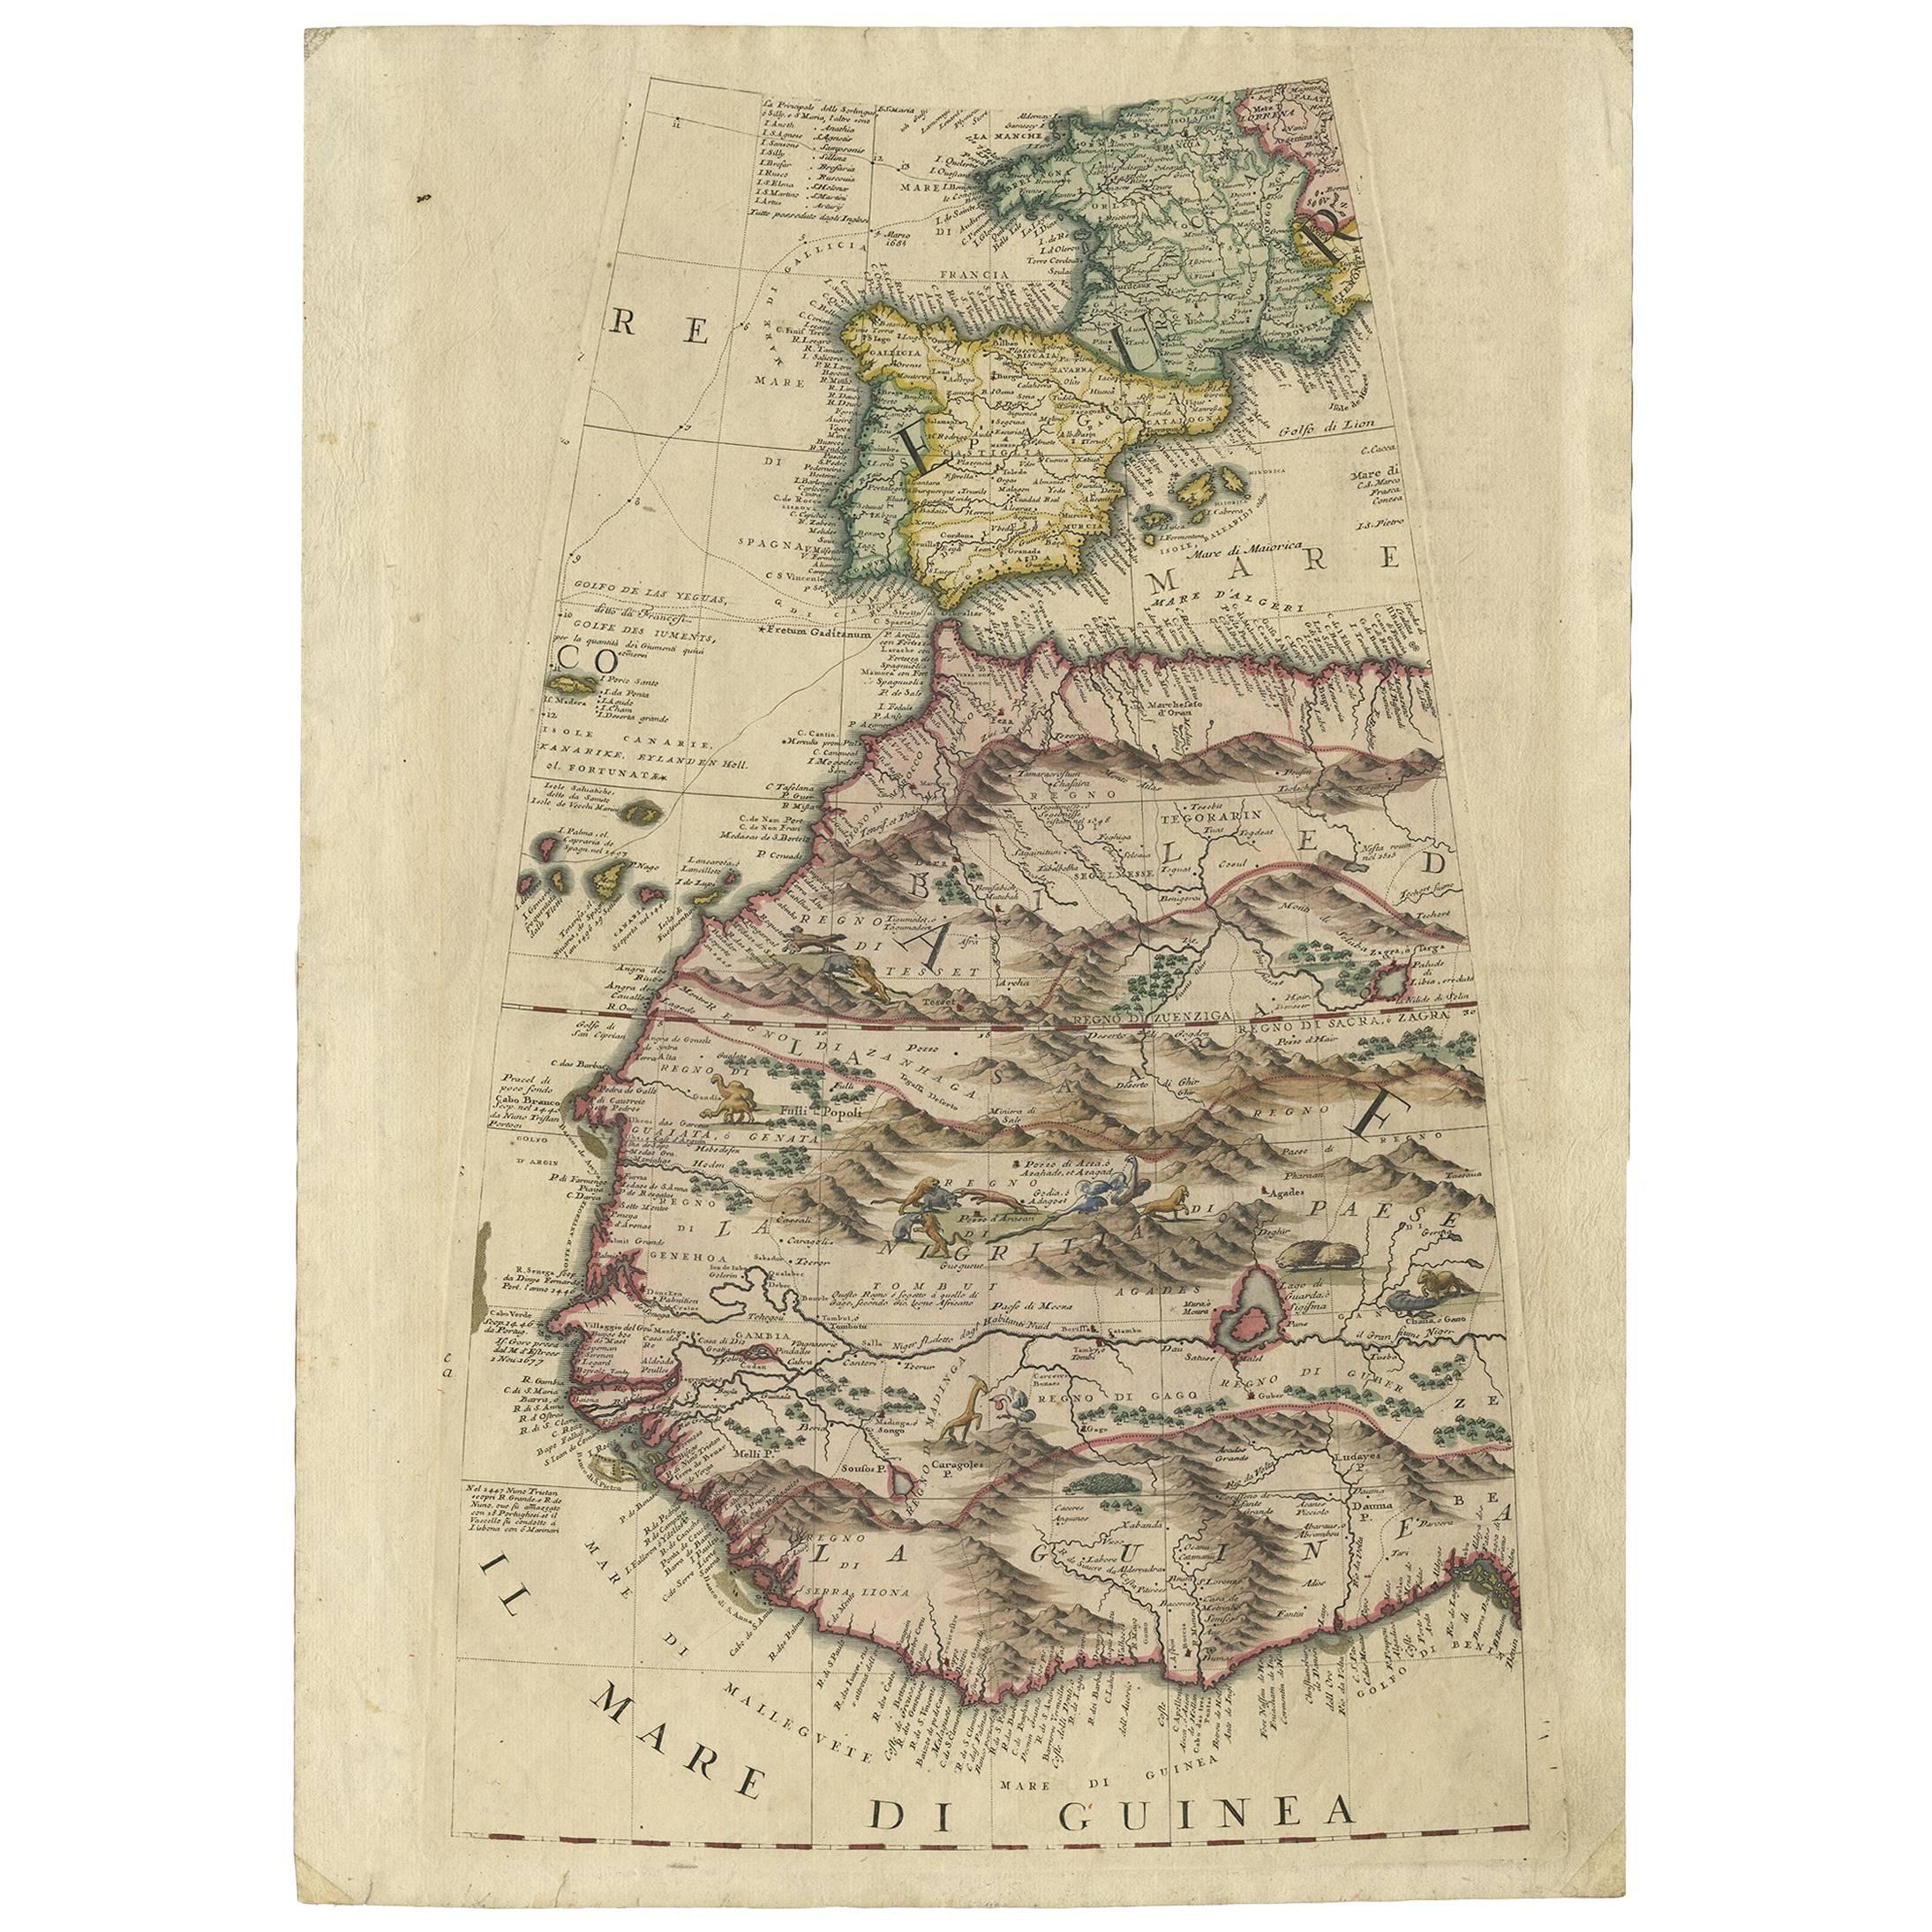 Rare Antique Map of Southwestern Europe and West Africa by V.M. Coronelli, 1692